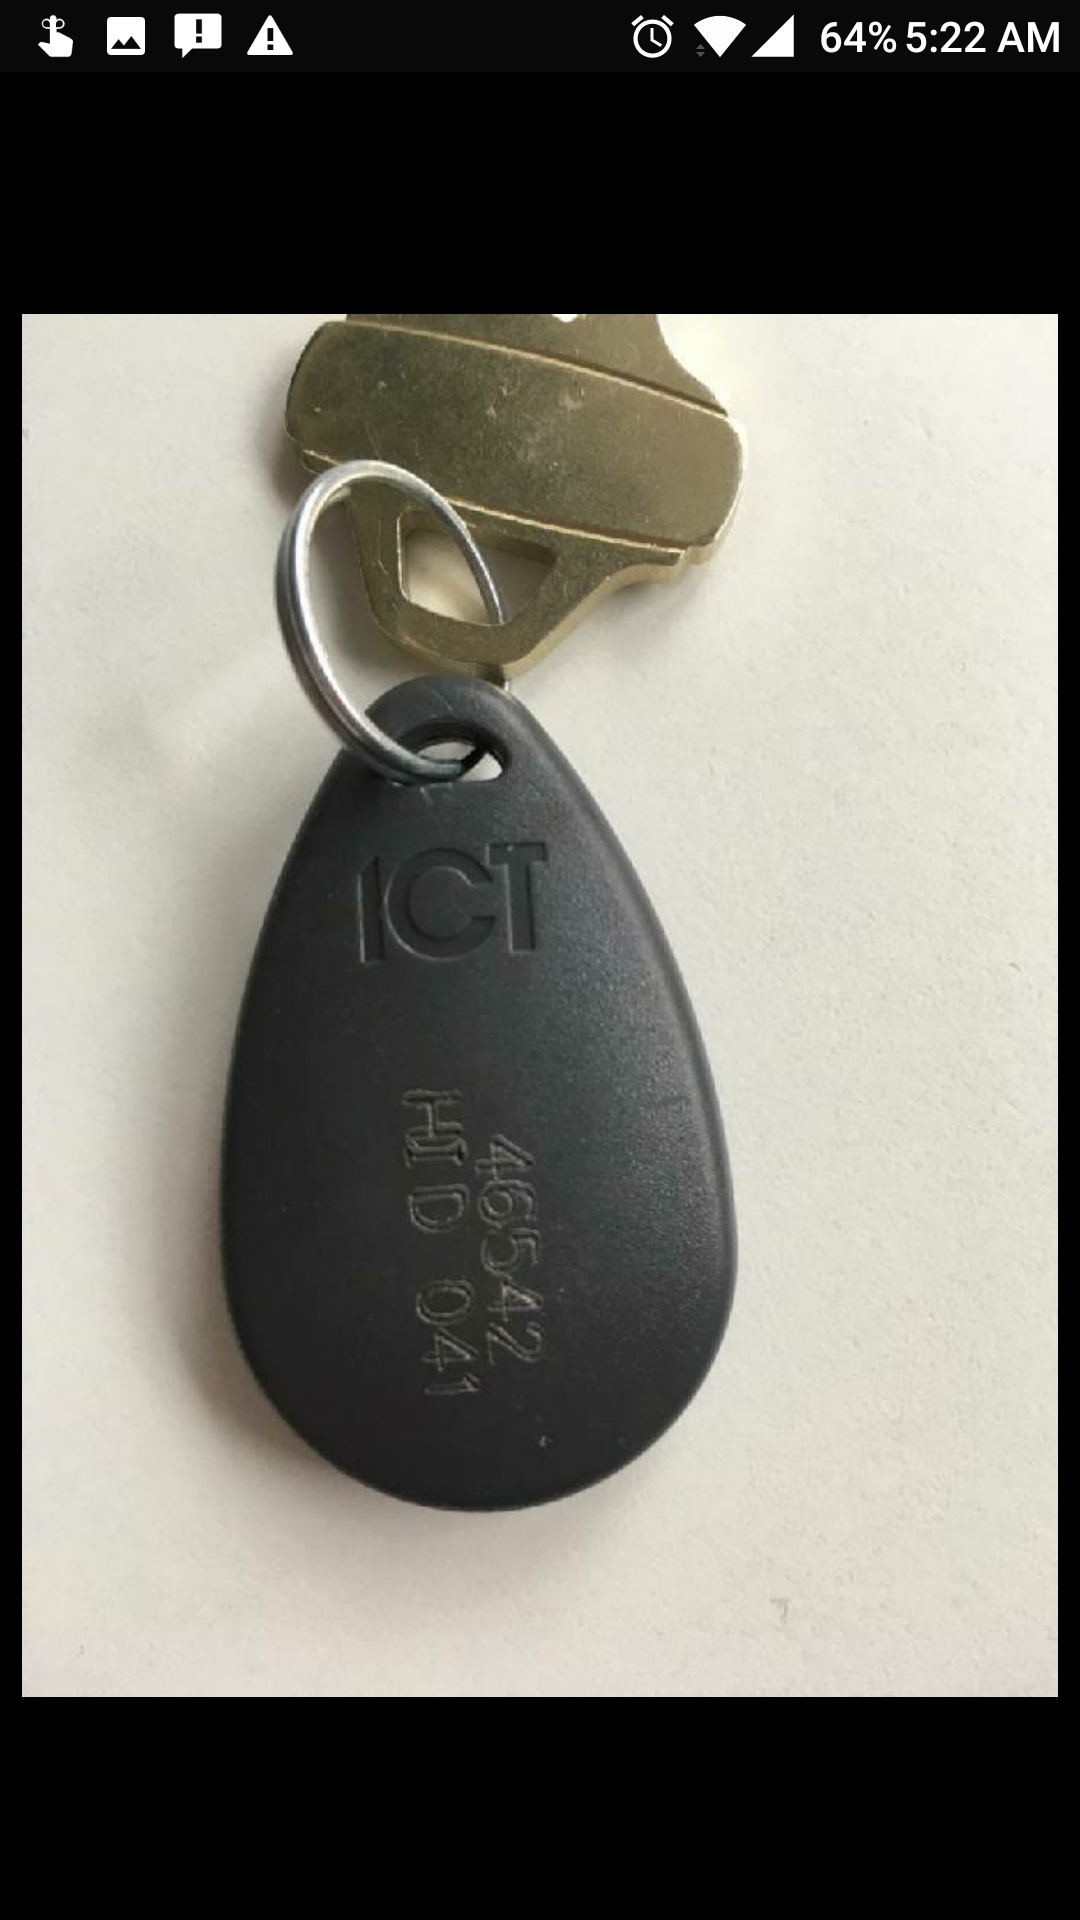 ICT HID fob key copy clone service duplicate replace replacement copying 